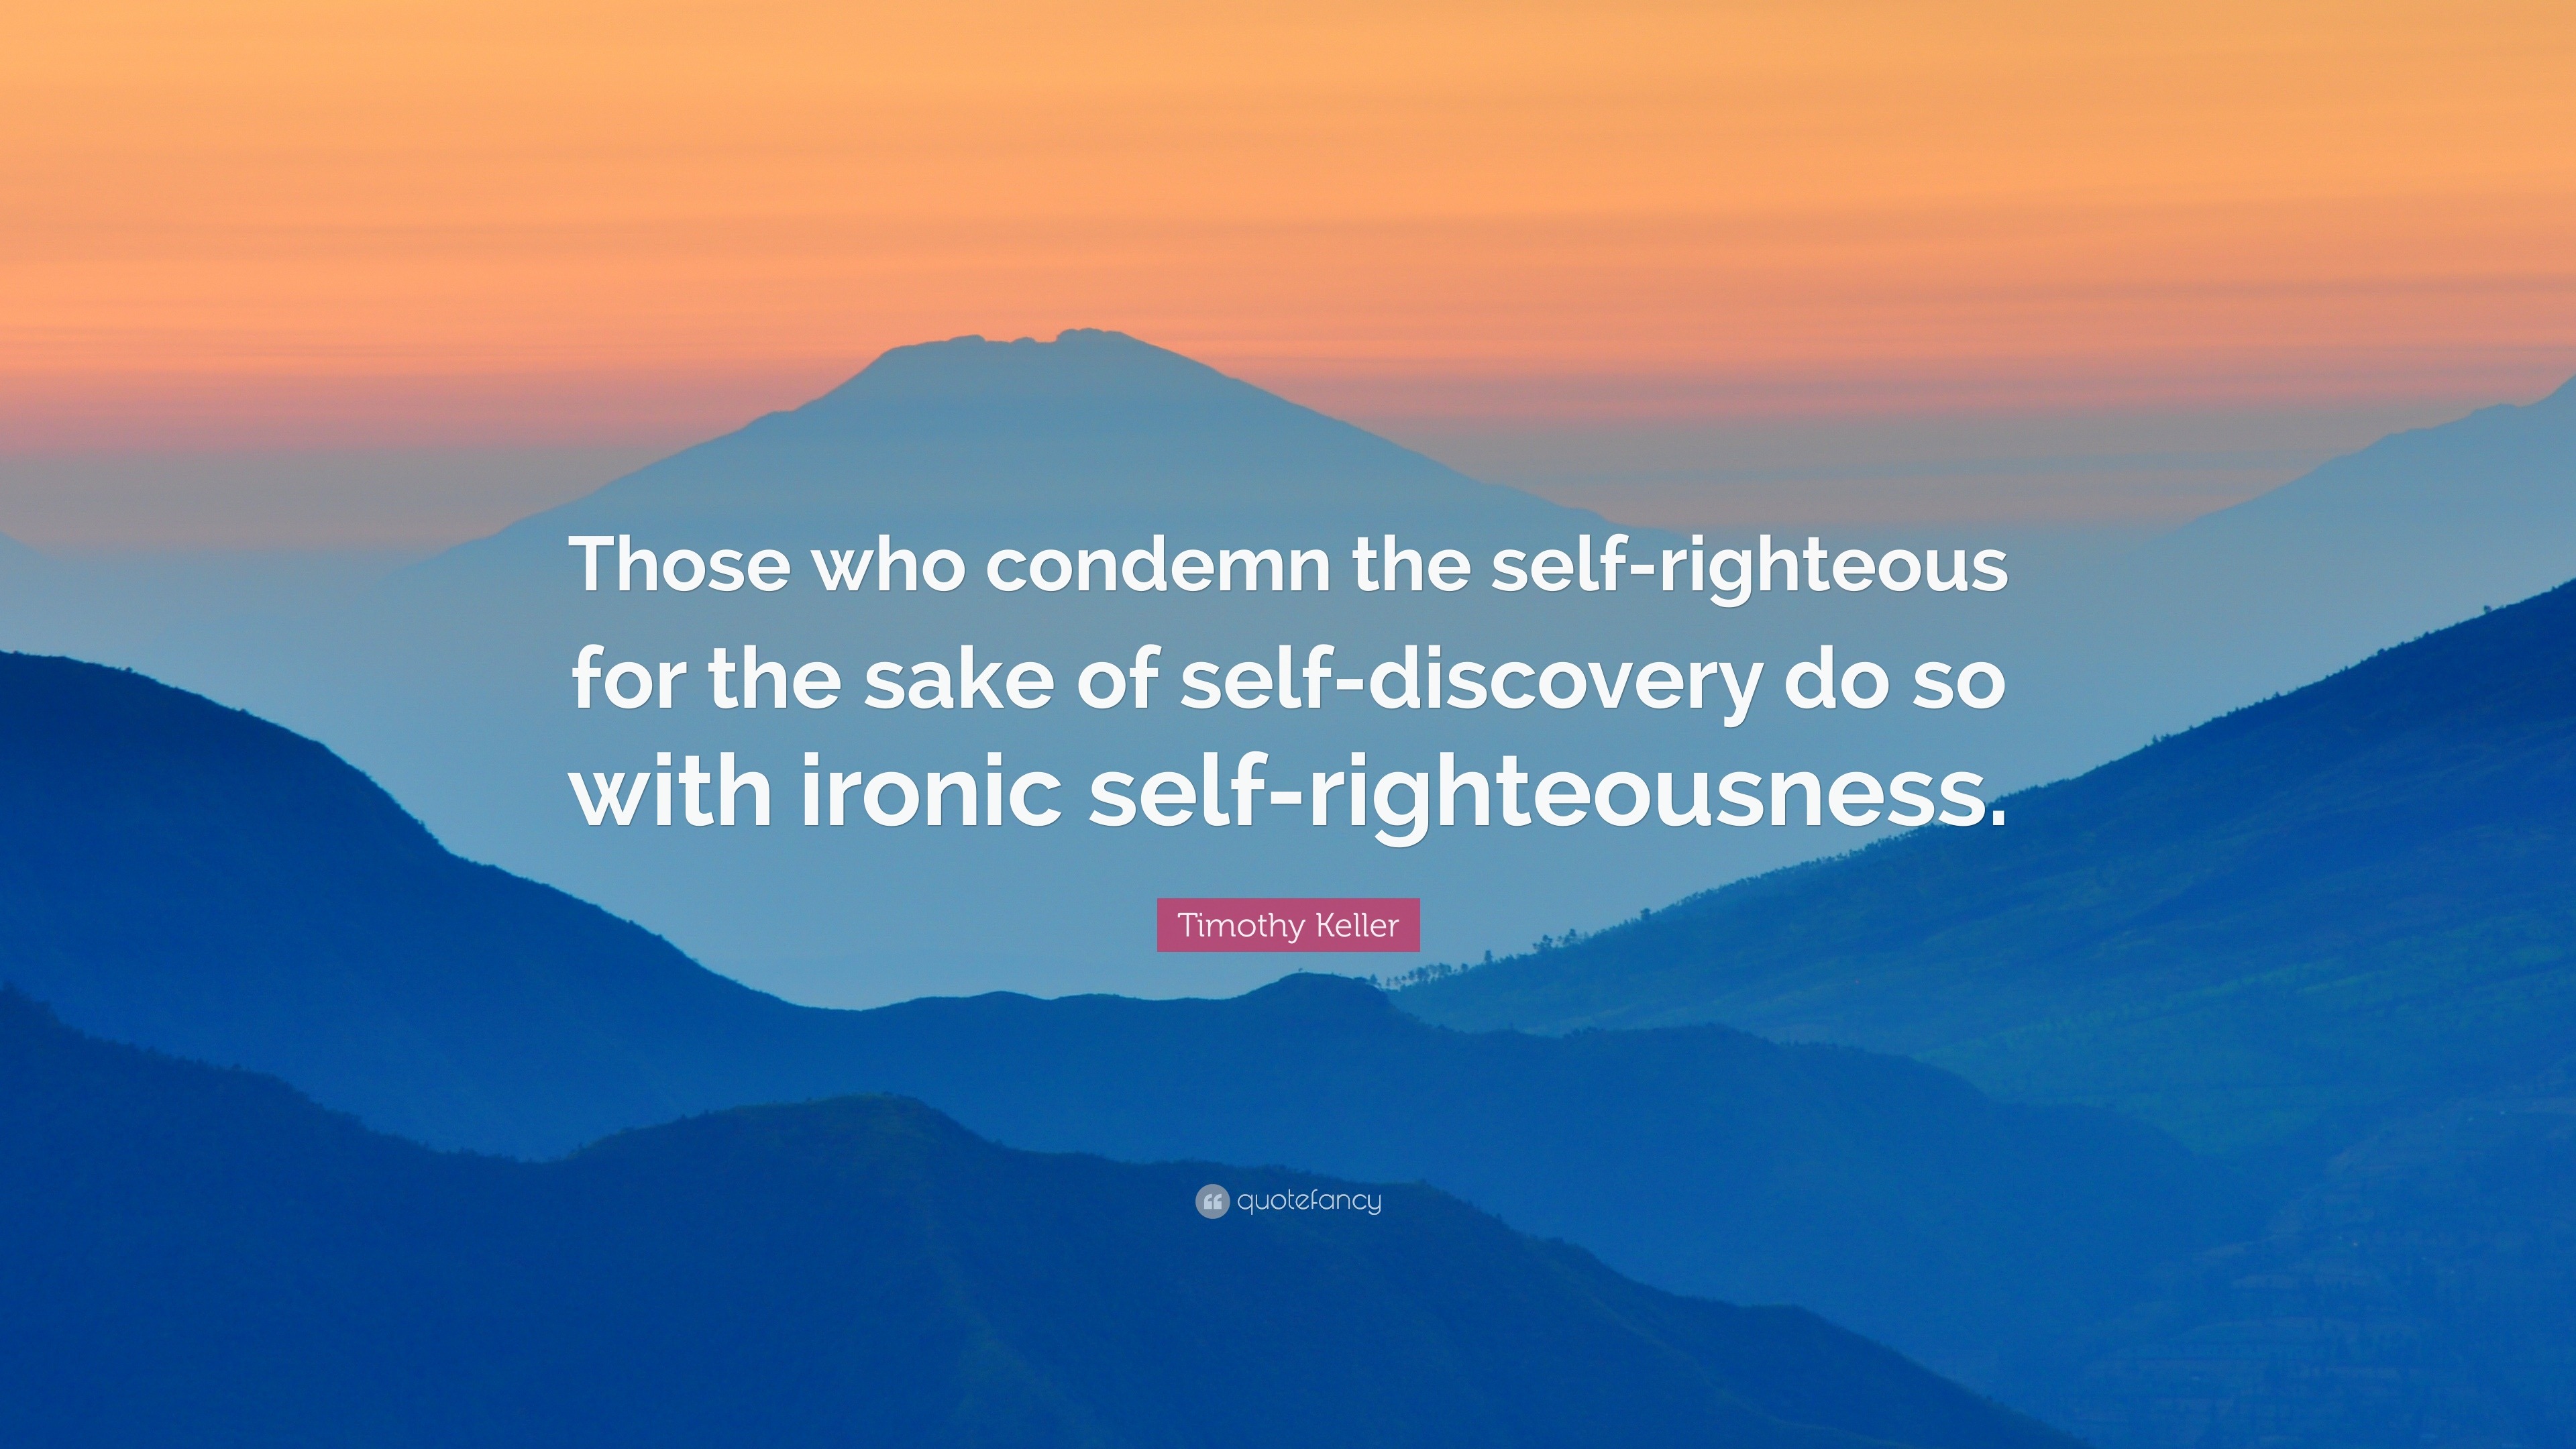 Timothy Keller Quote: “Those who condemn the self-righteous for the